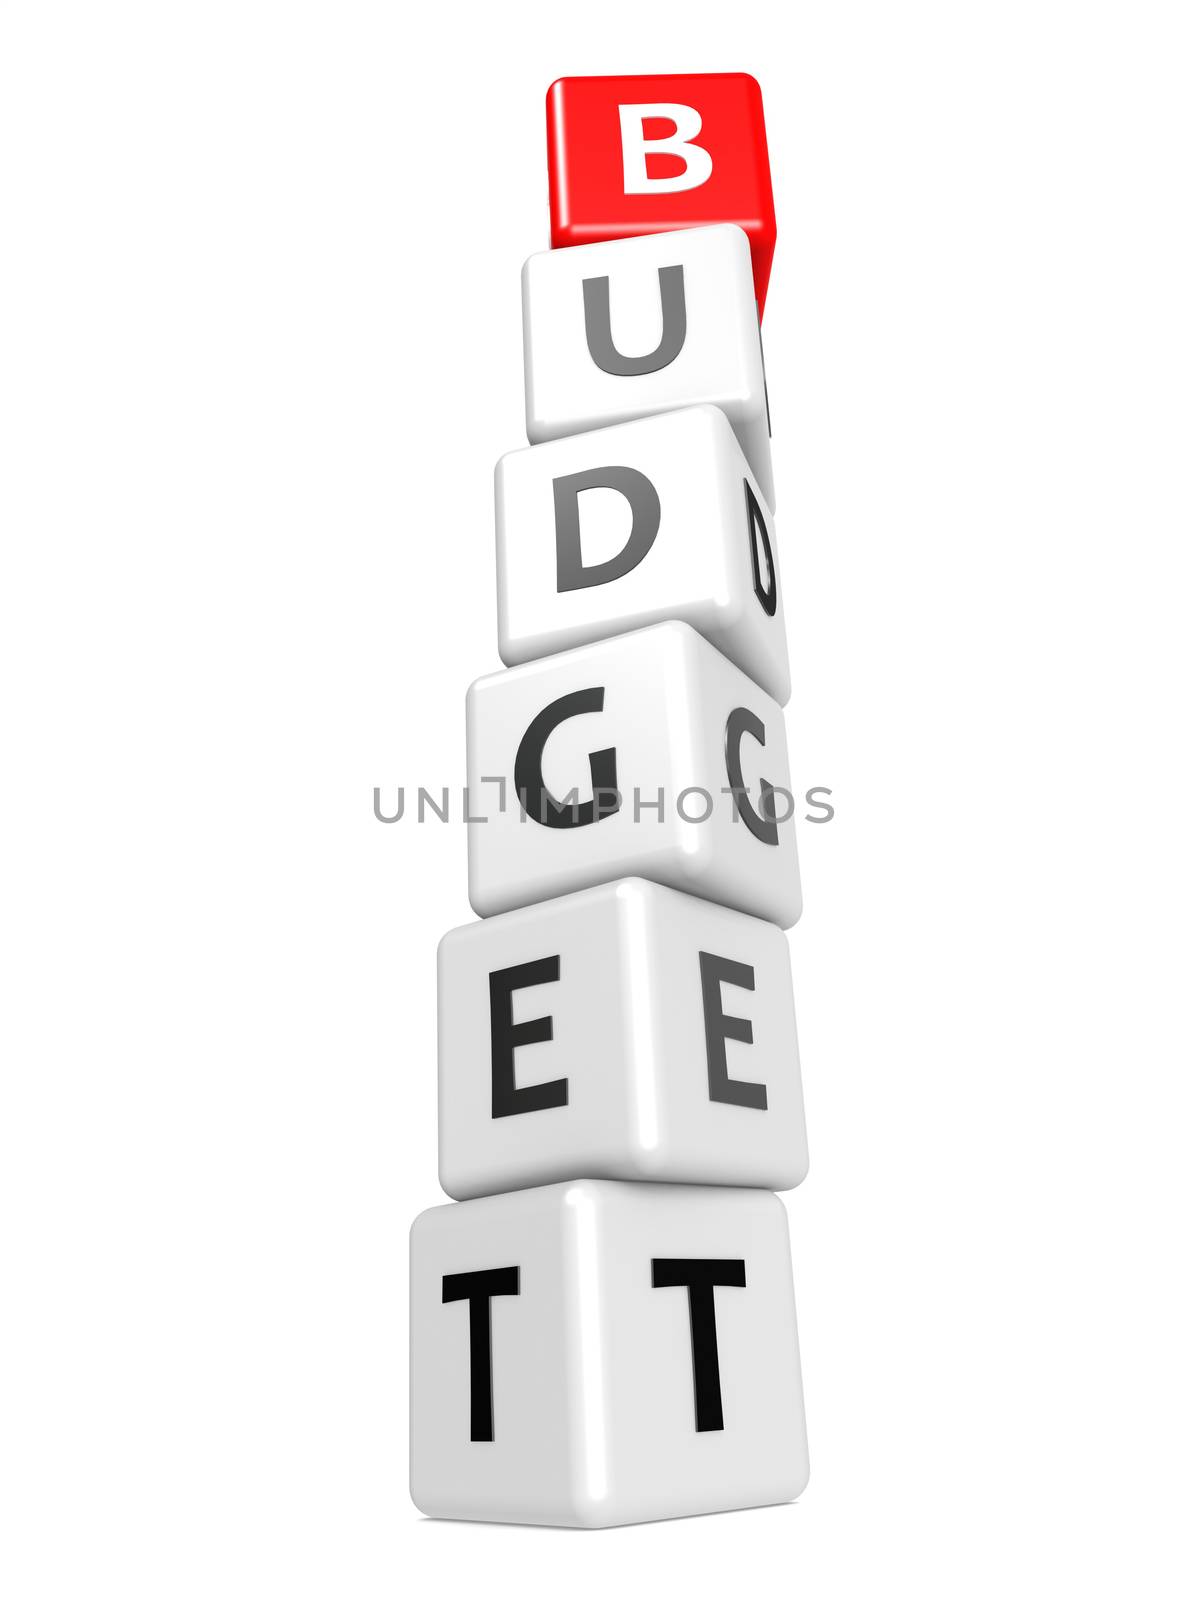 Buzzword budget image with hi-res rendered artwork that could be used for any graphic design.